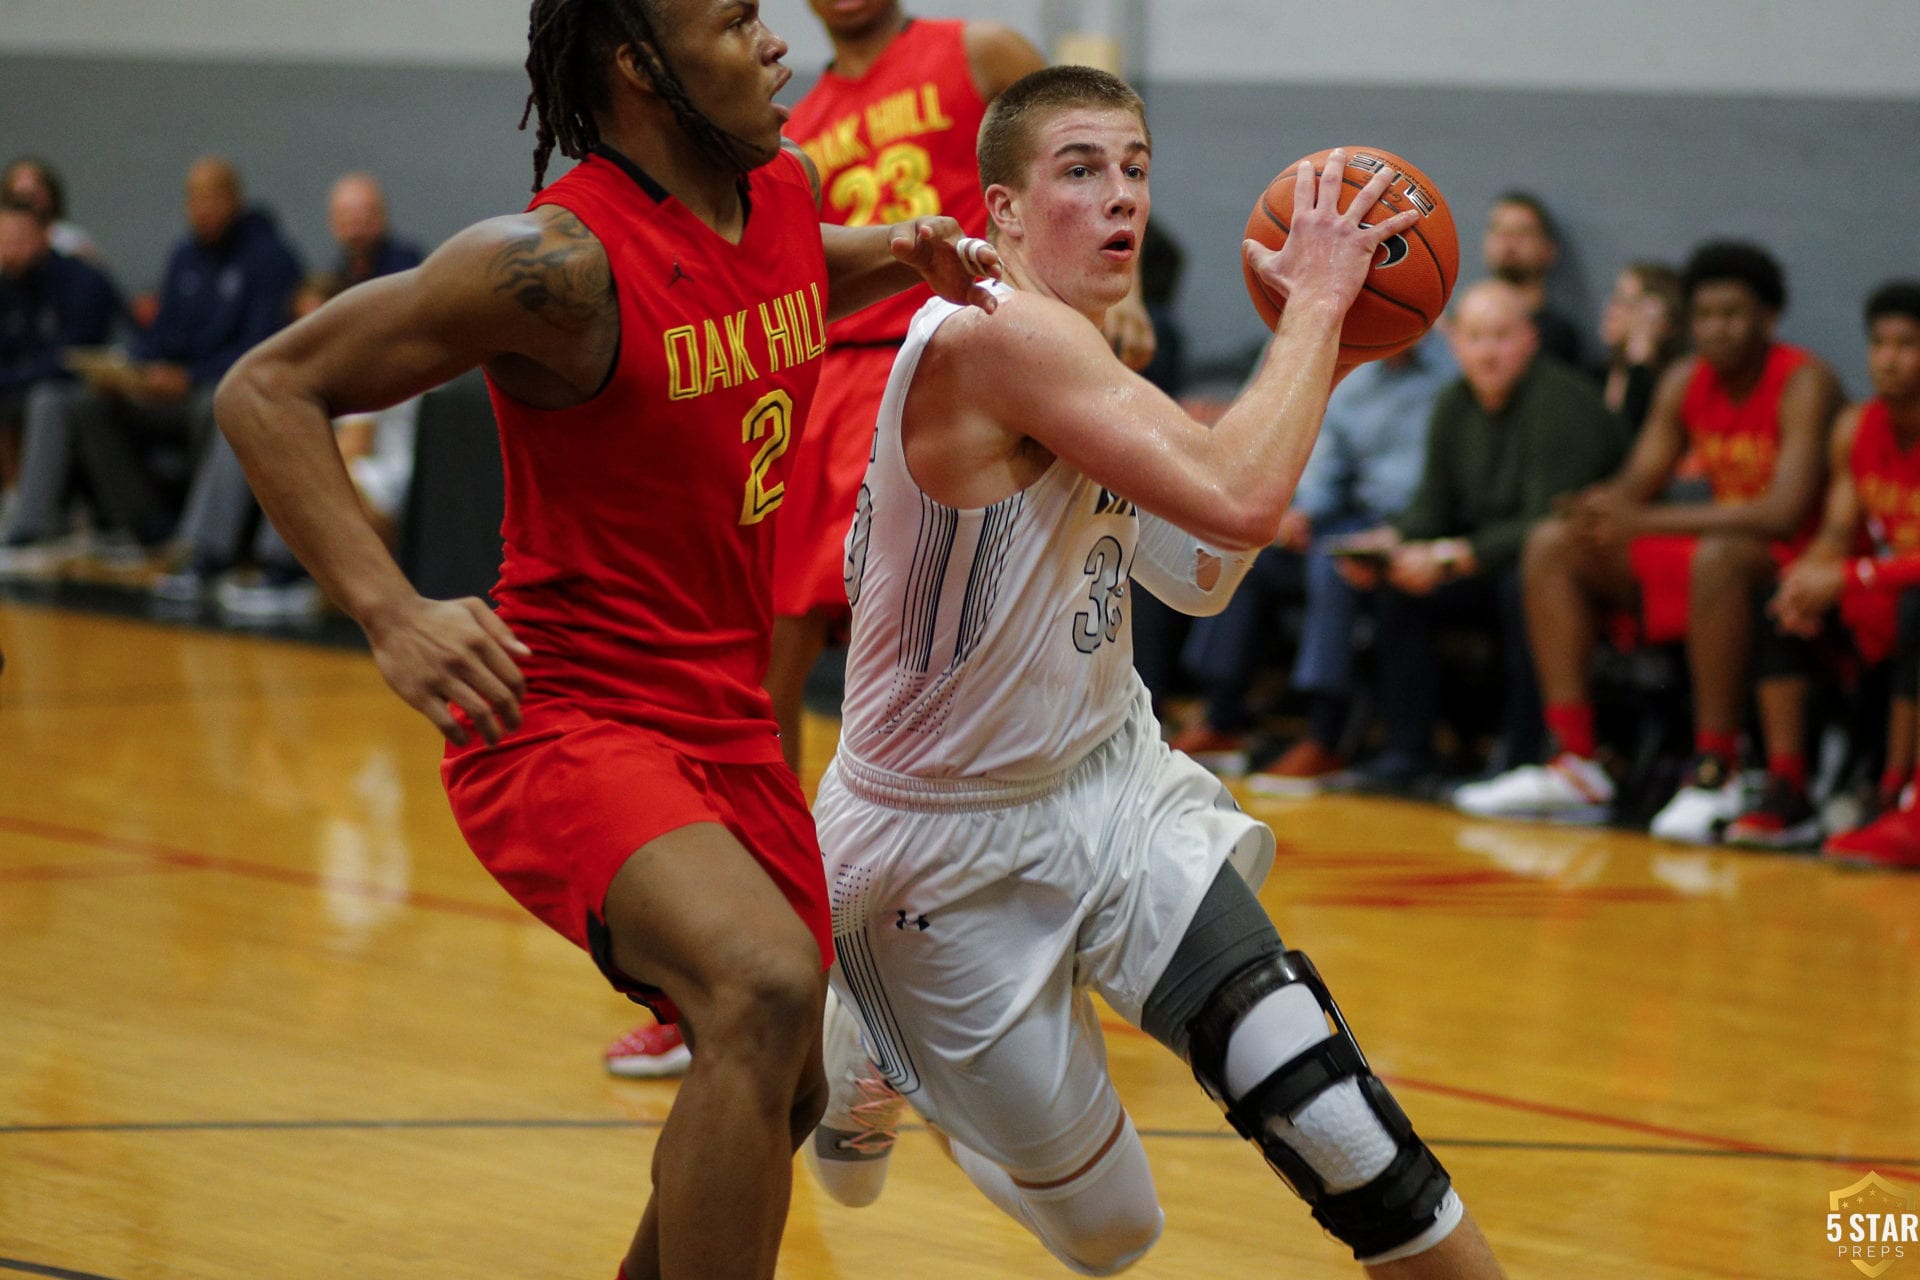 Grant Ledford of Grace Christian (white jersey) drives into the lane with Oak Hill Academy's Christian Brown defending. (Photo: Danny Parker).